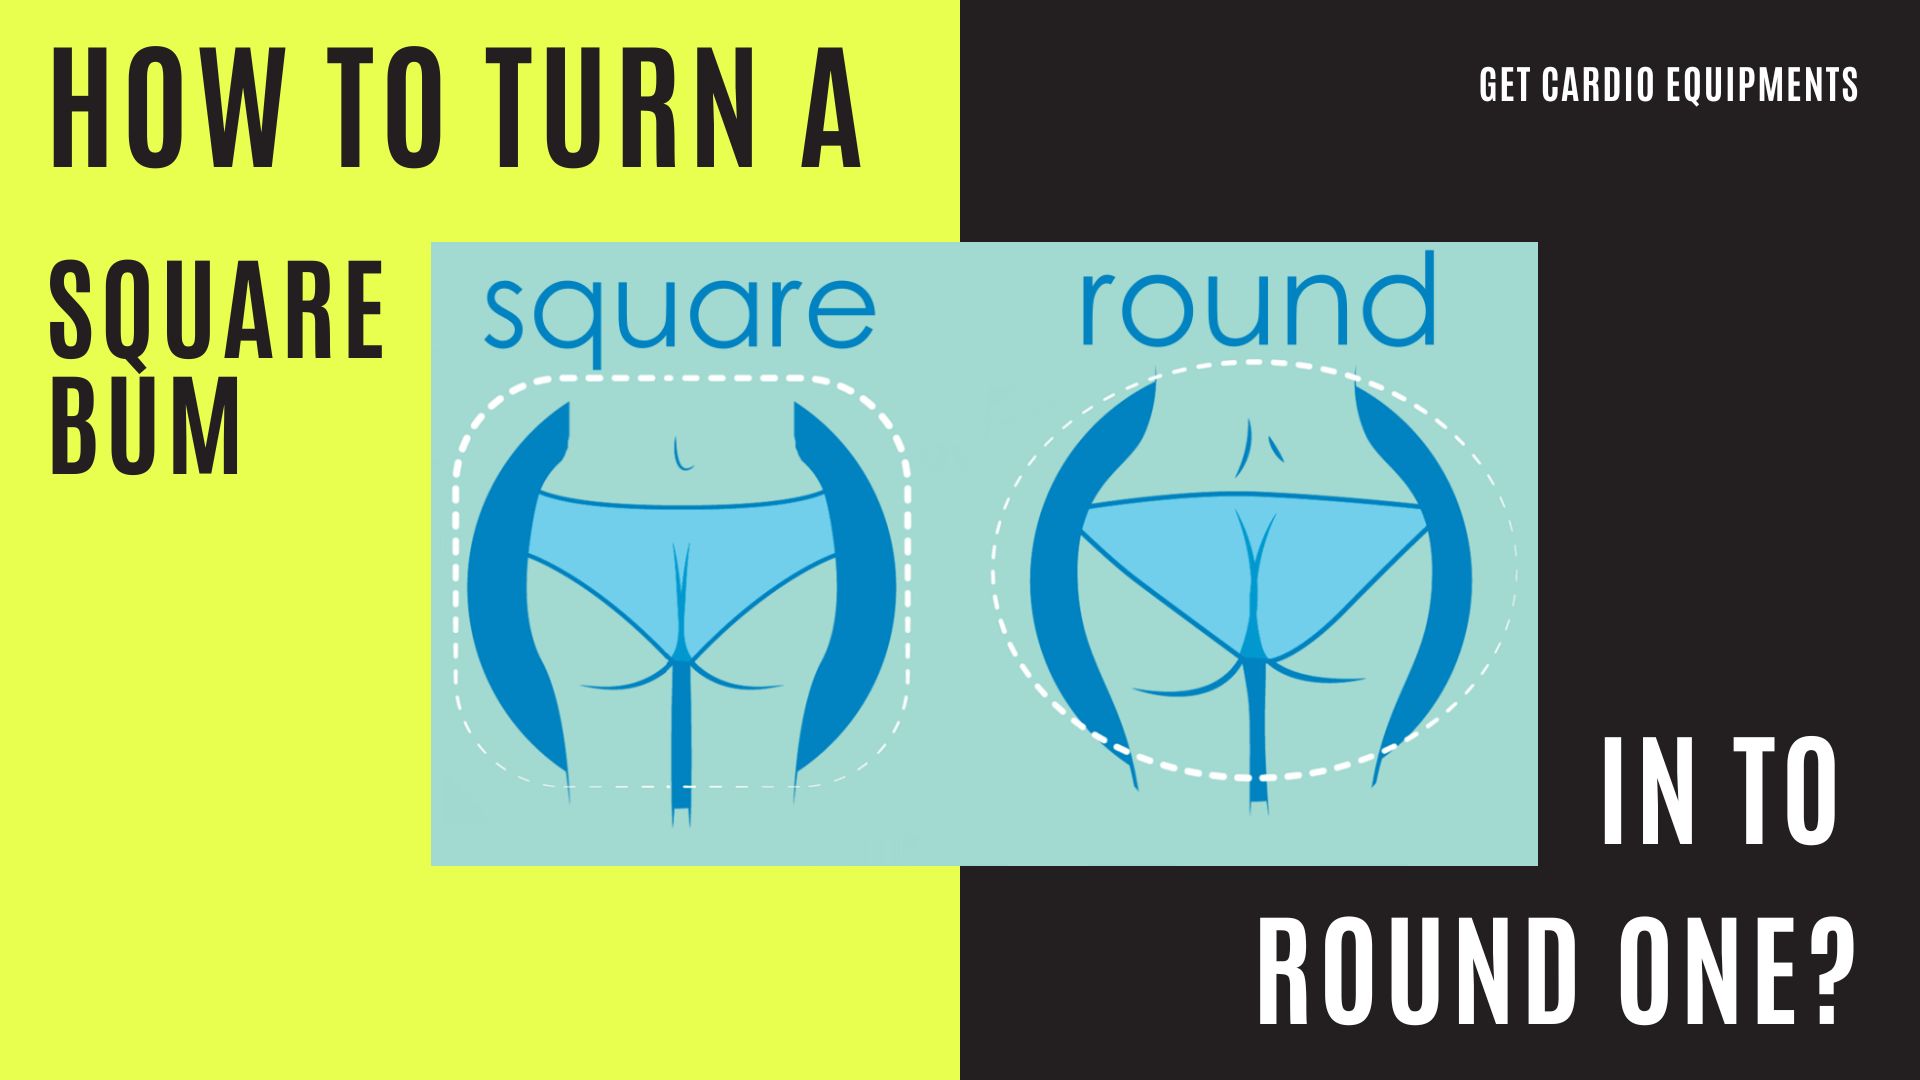 how to turn a square bum into a round one